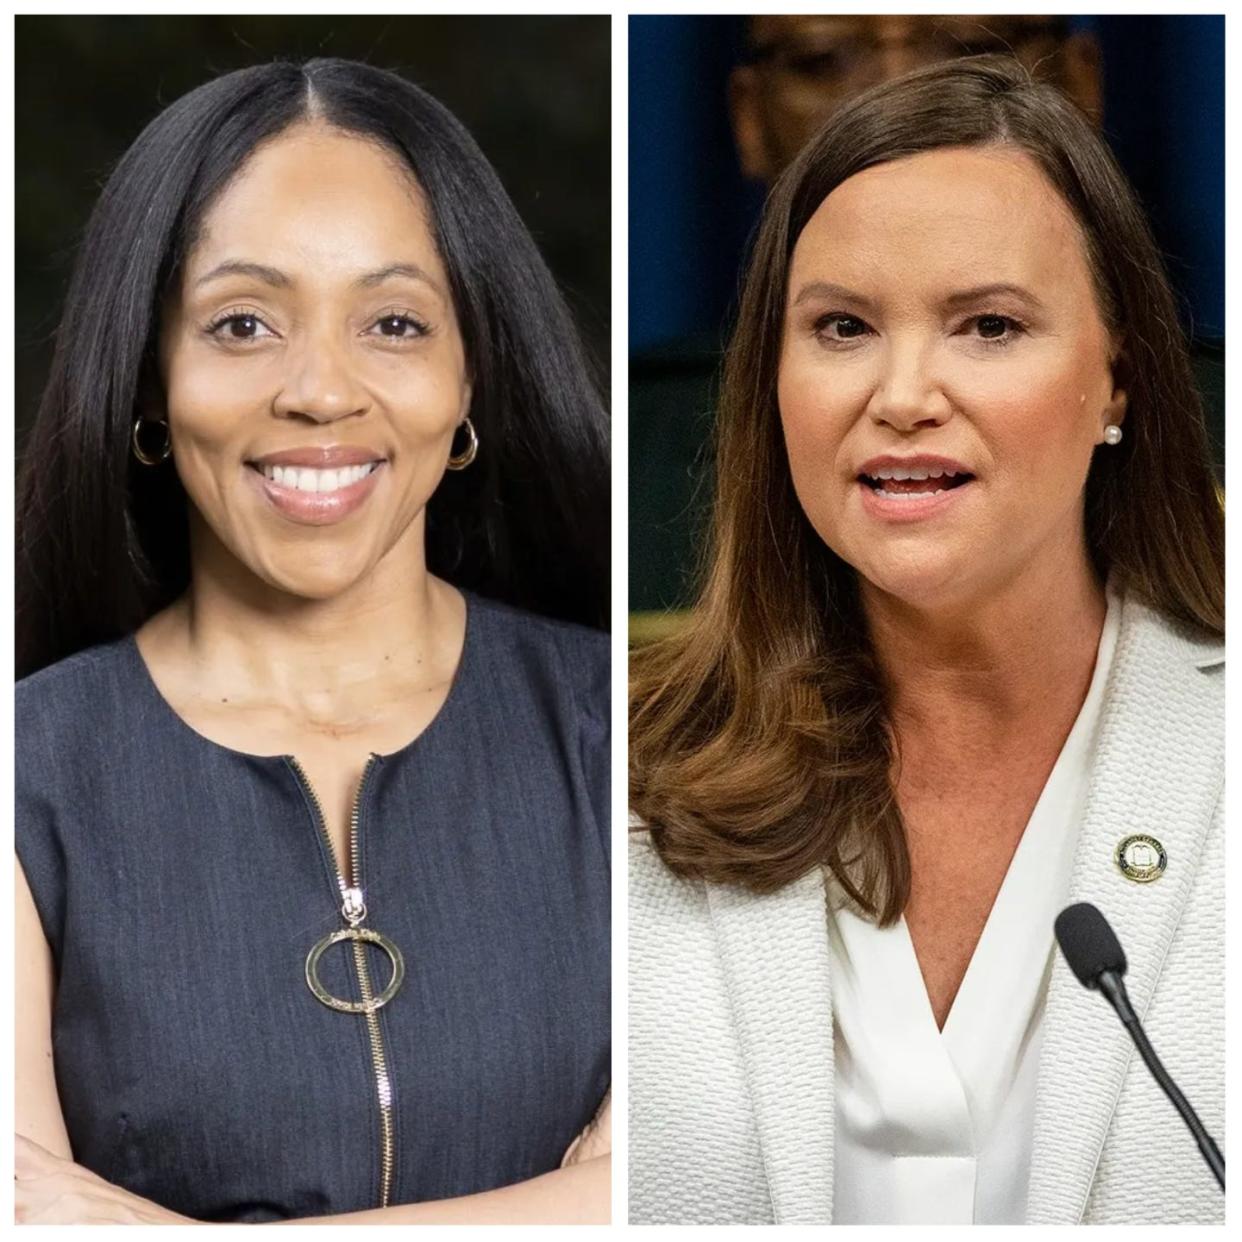 Florida Attorney General Ashley Moody, right, faces challenger Aramis Ayala.